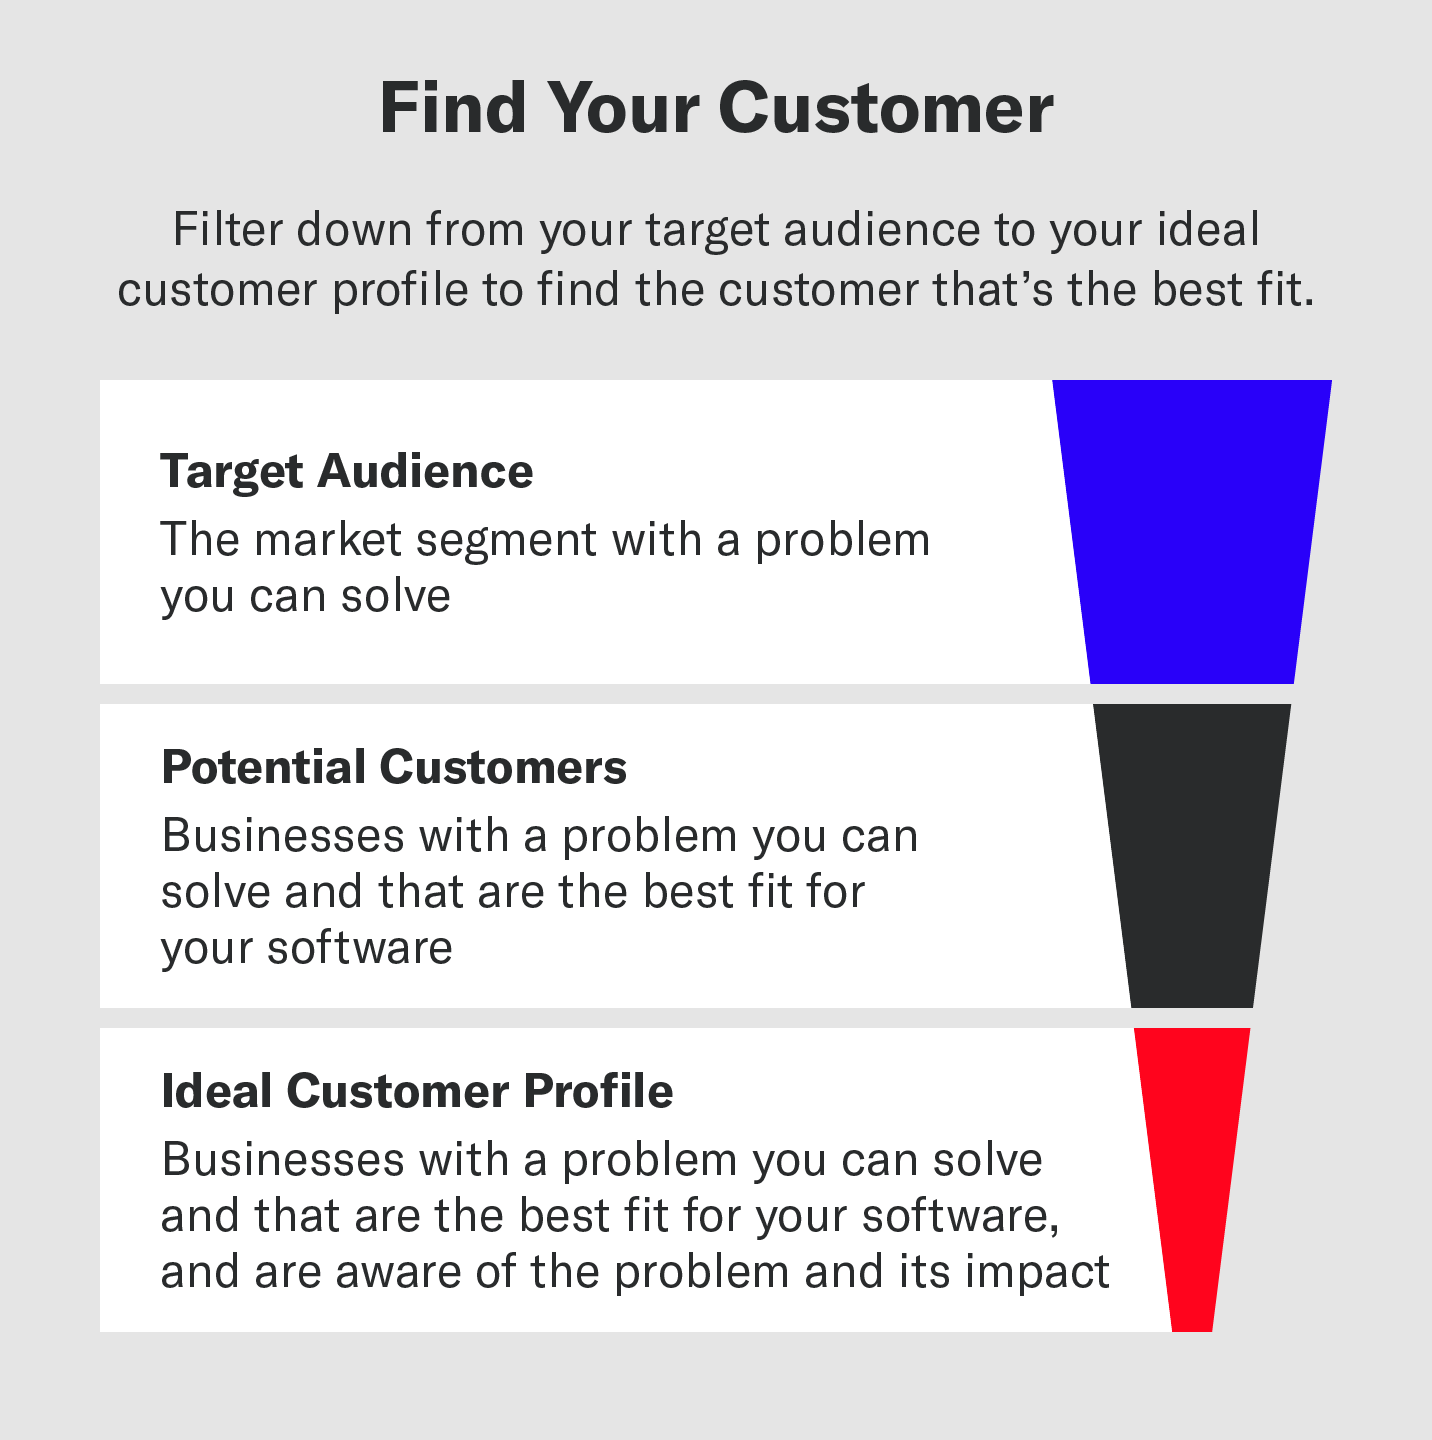 How to find your ideal customer profile.